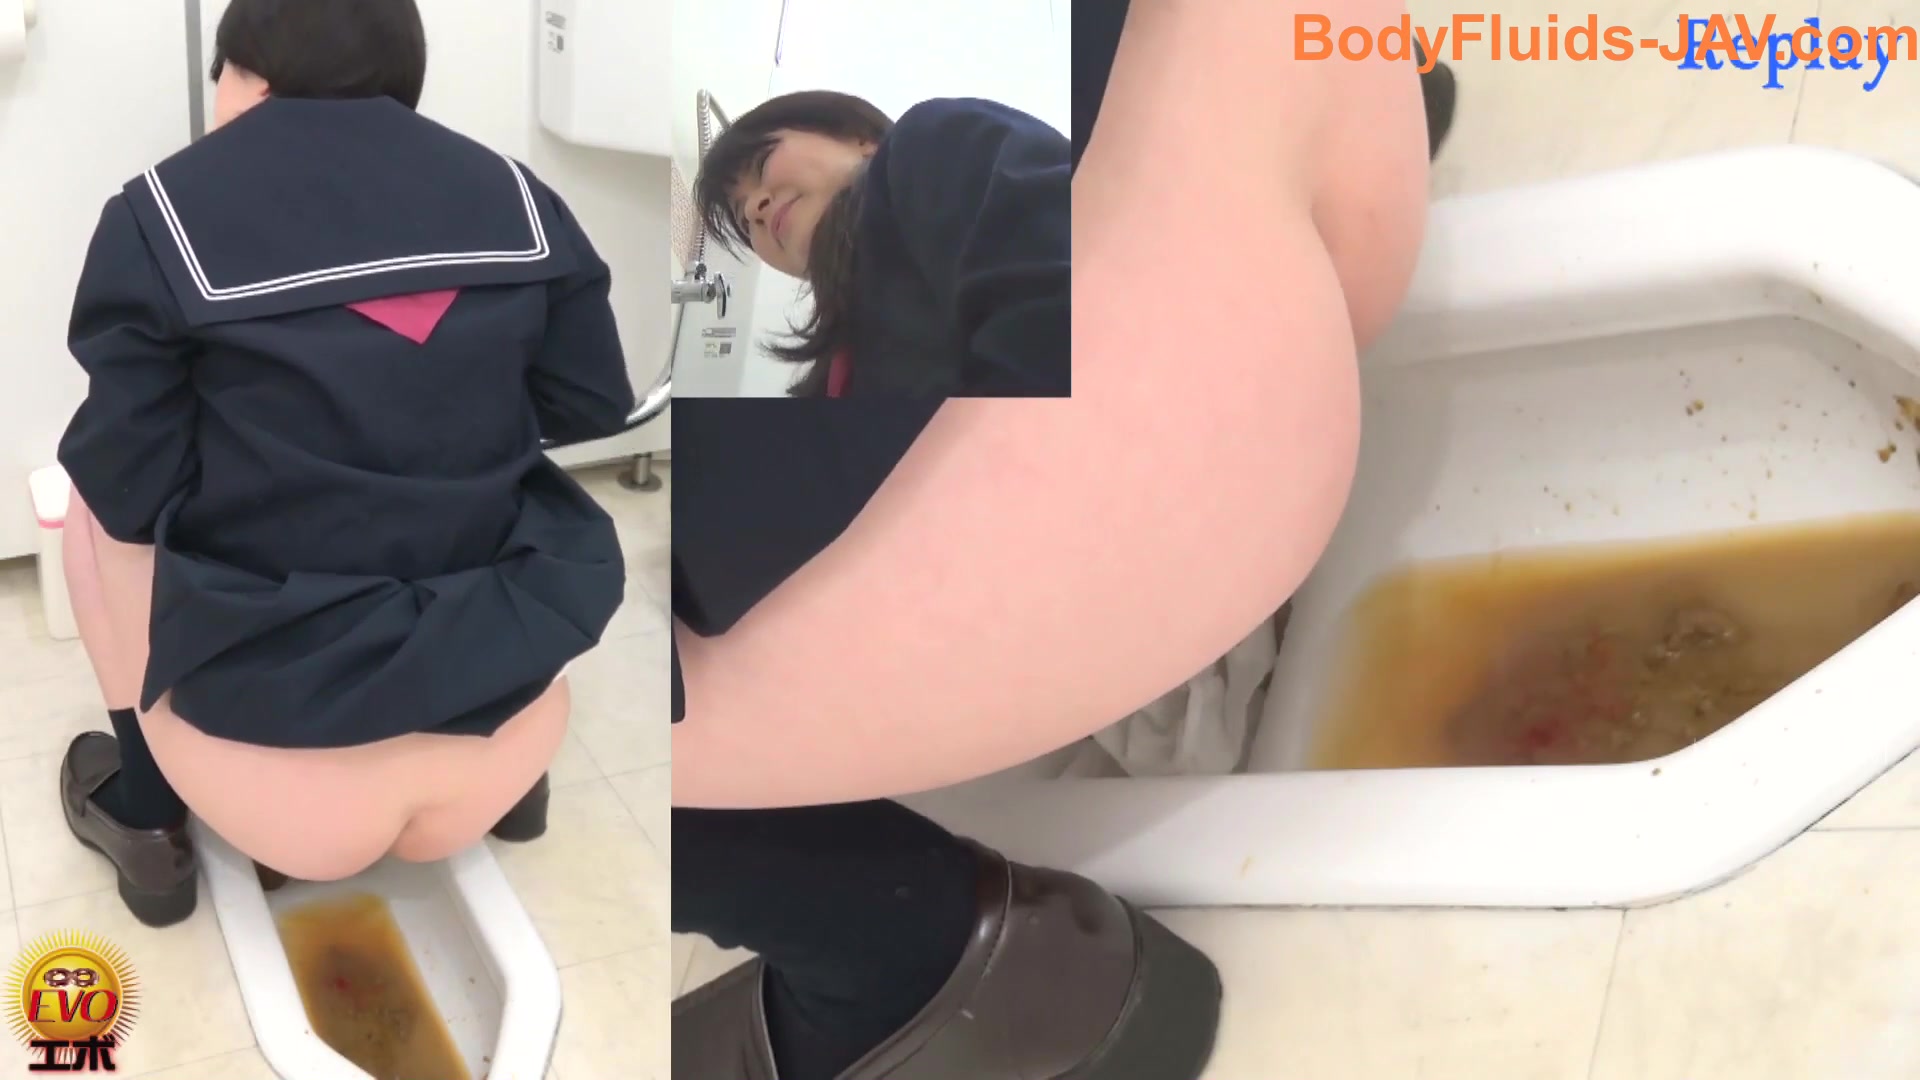 Bad School Lunch 19 - ScatFap.com - scat porn search - FREE videos of  extreme kaviar and copro sex, dirty shit eating and smearing